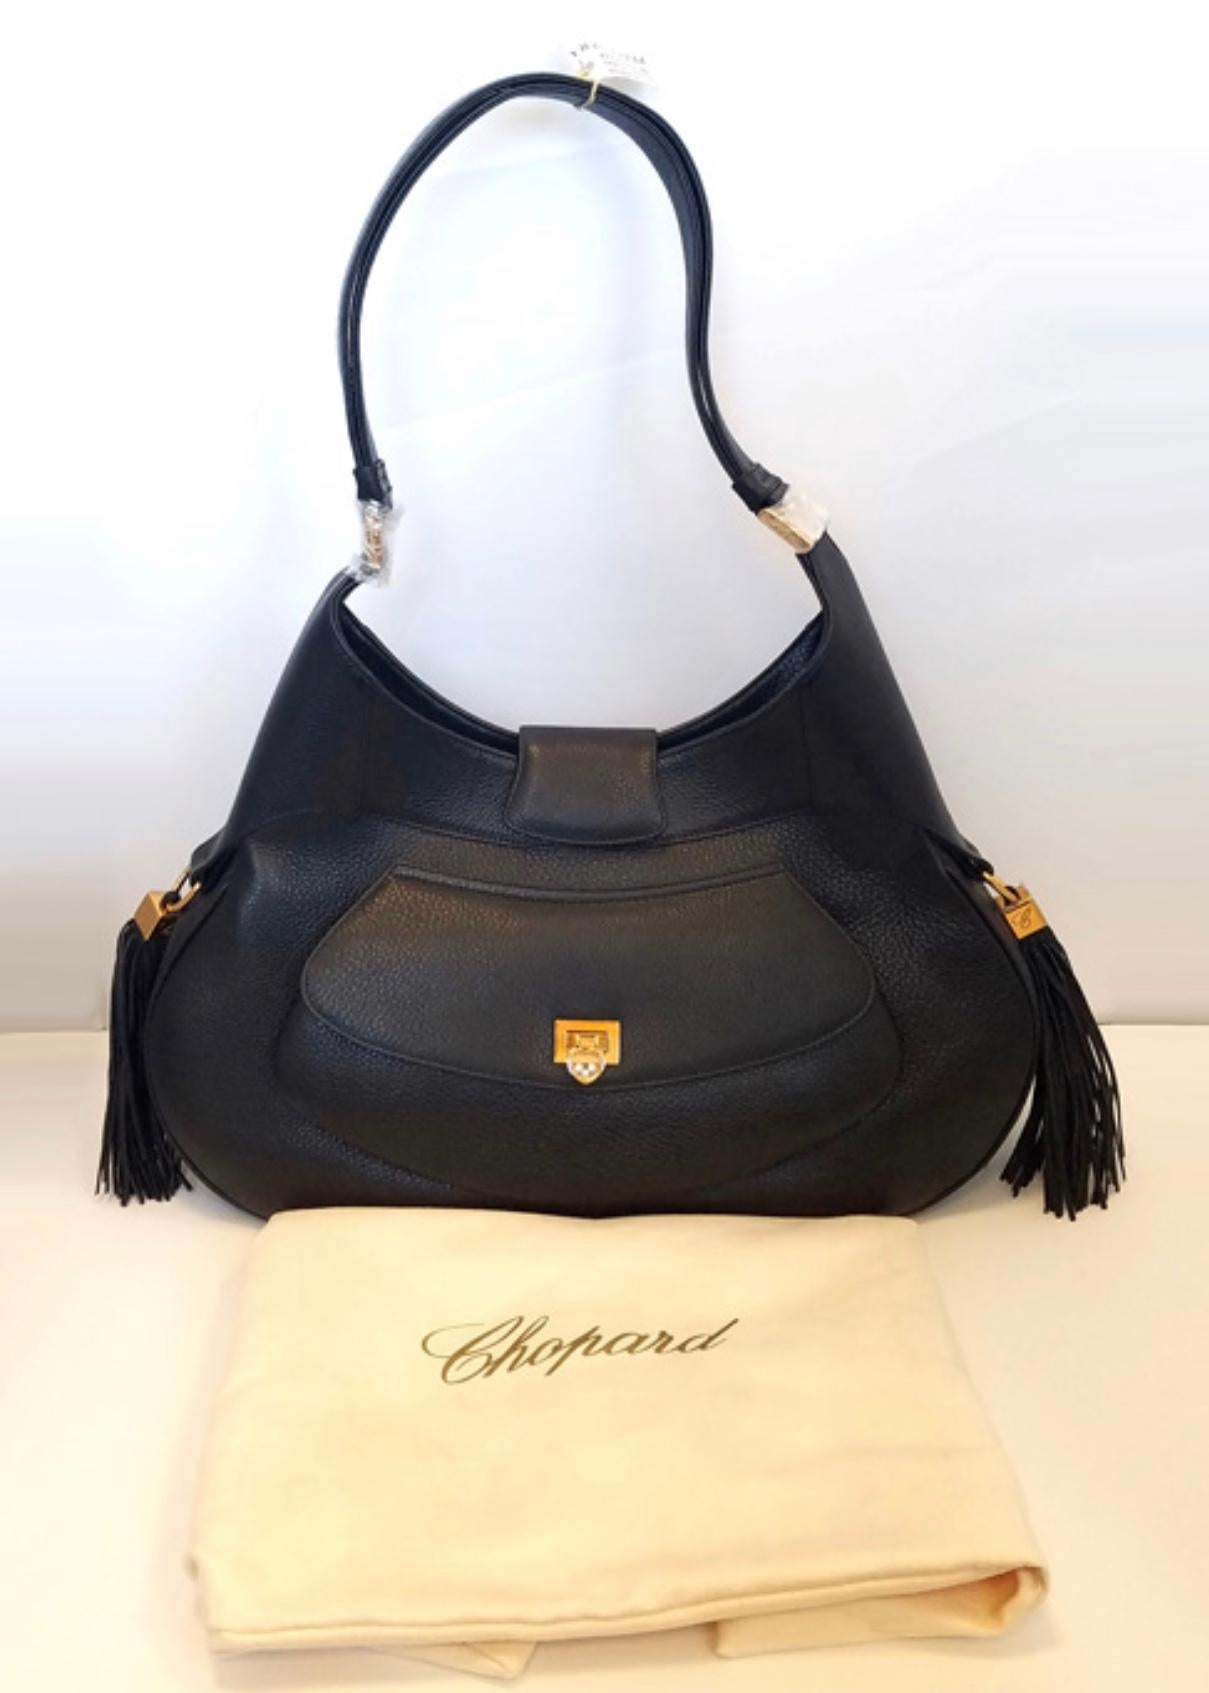 This handbag from Chopard has an earthy yet glamorous feel that is perfect for every day wear. Made in Italy of the finest calfskin leather and a gorgeously patterned cloth, this bag will stay in good shape for many years to come. With dimensions